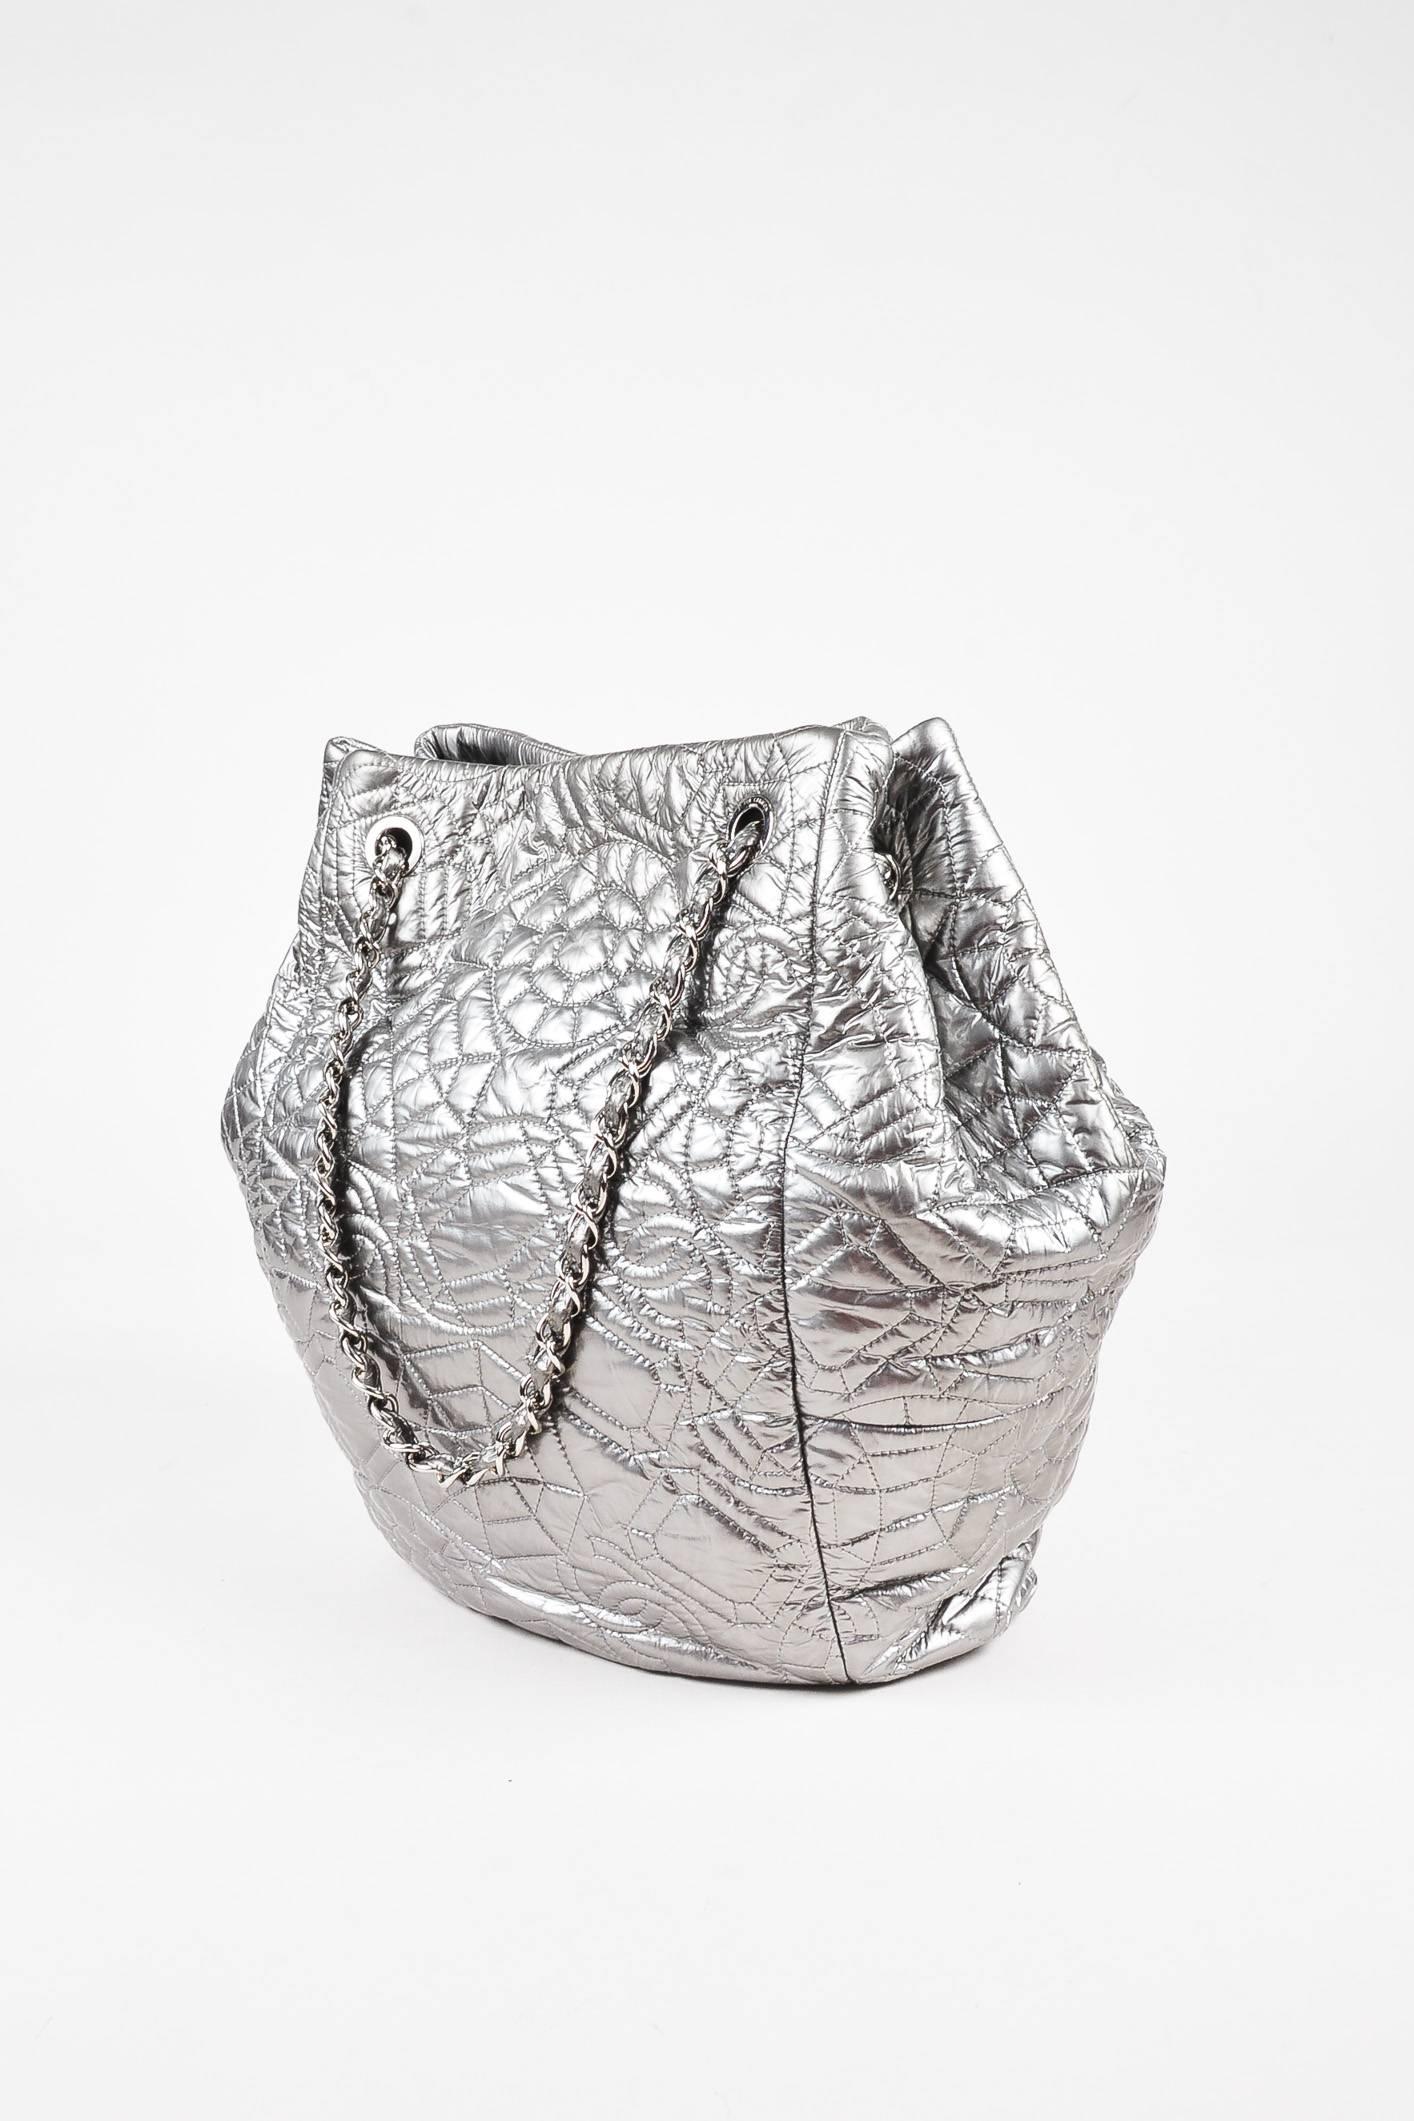 Silver metallic calfskin leather "Graphic Edge" tote handbag by Chanel. Features a geometric and "CC" pattern quilted throughout exterior. Silver-tone chain link and leather woven handles. Sides can cinch or expand. Silver-tone